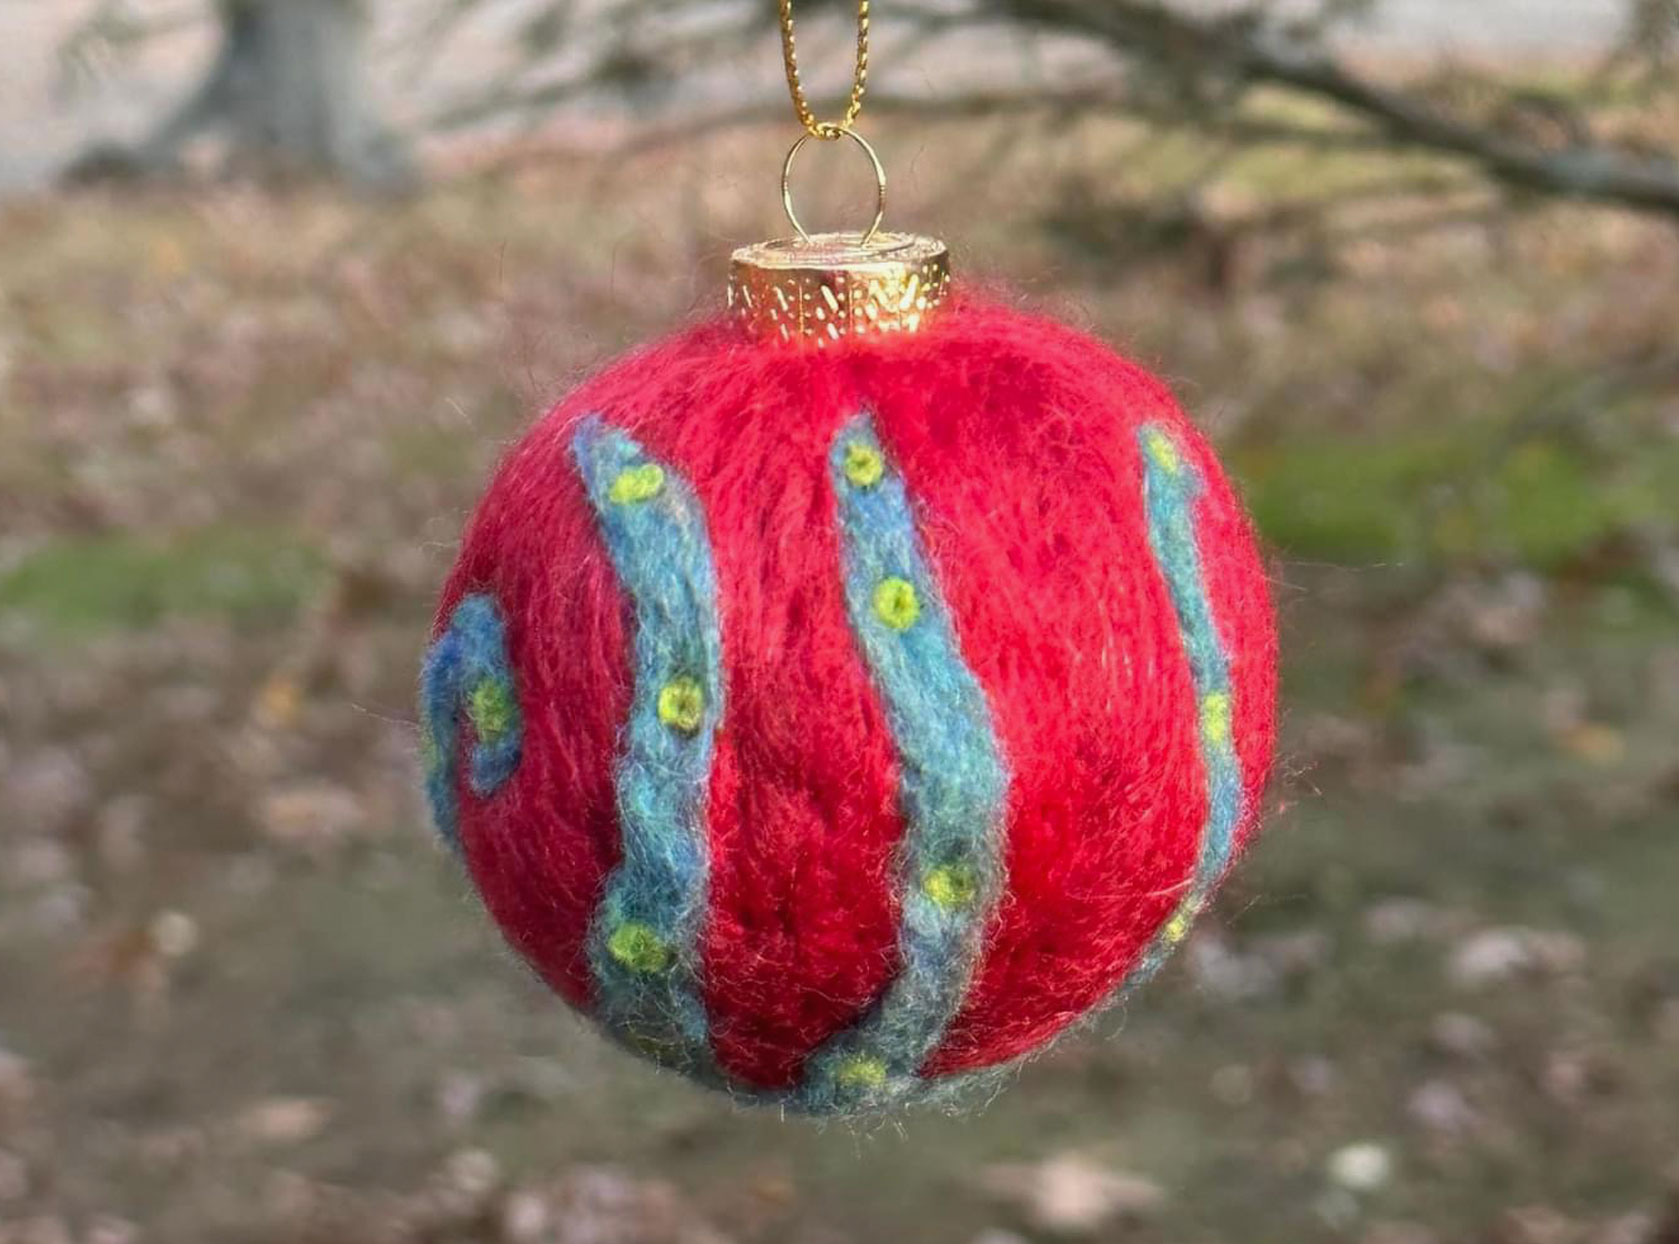 One of Allison's felted tentacle solstice ornaments